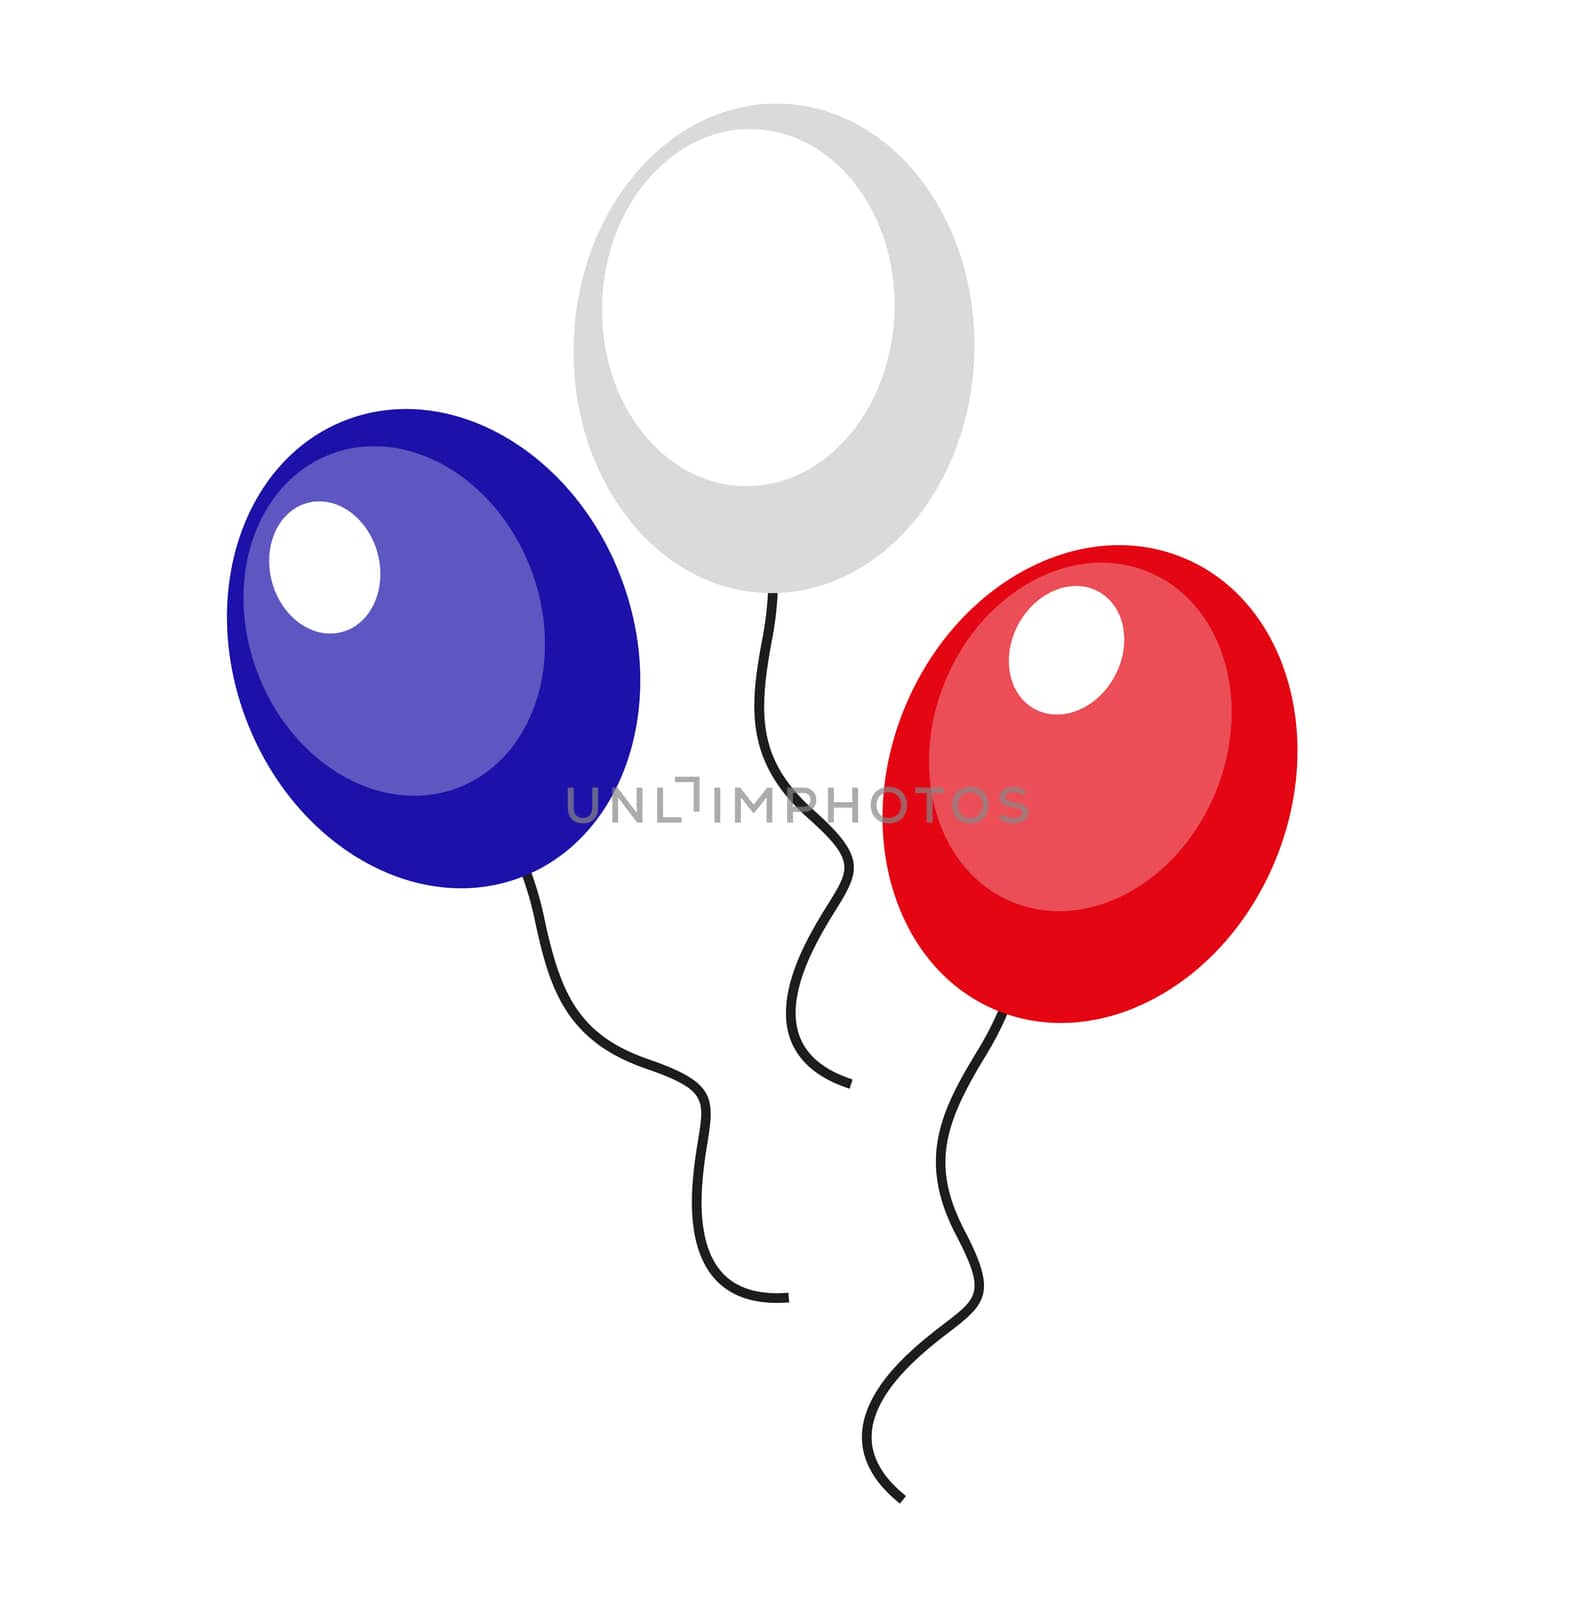 Balloons blue, red, white icon, flat style. 4th july concept. Isolated on white background. illustration. by lucia_fox